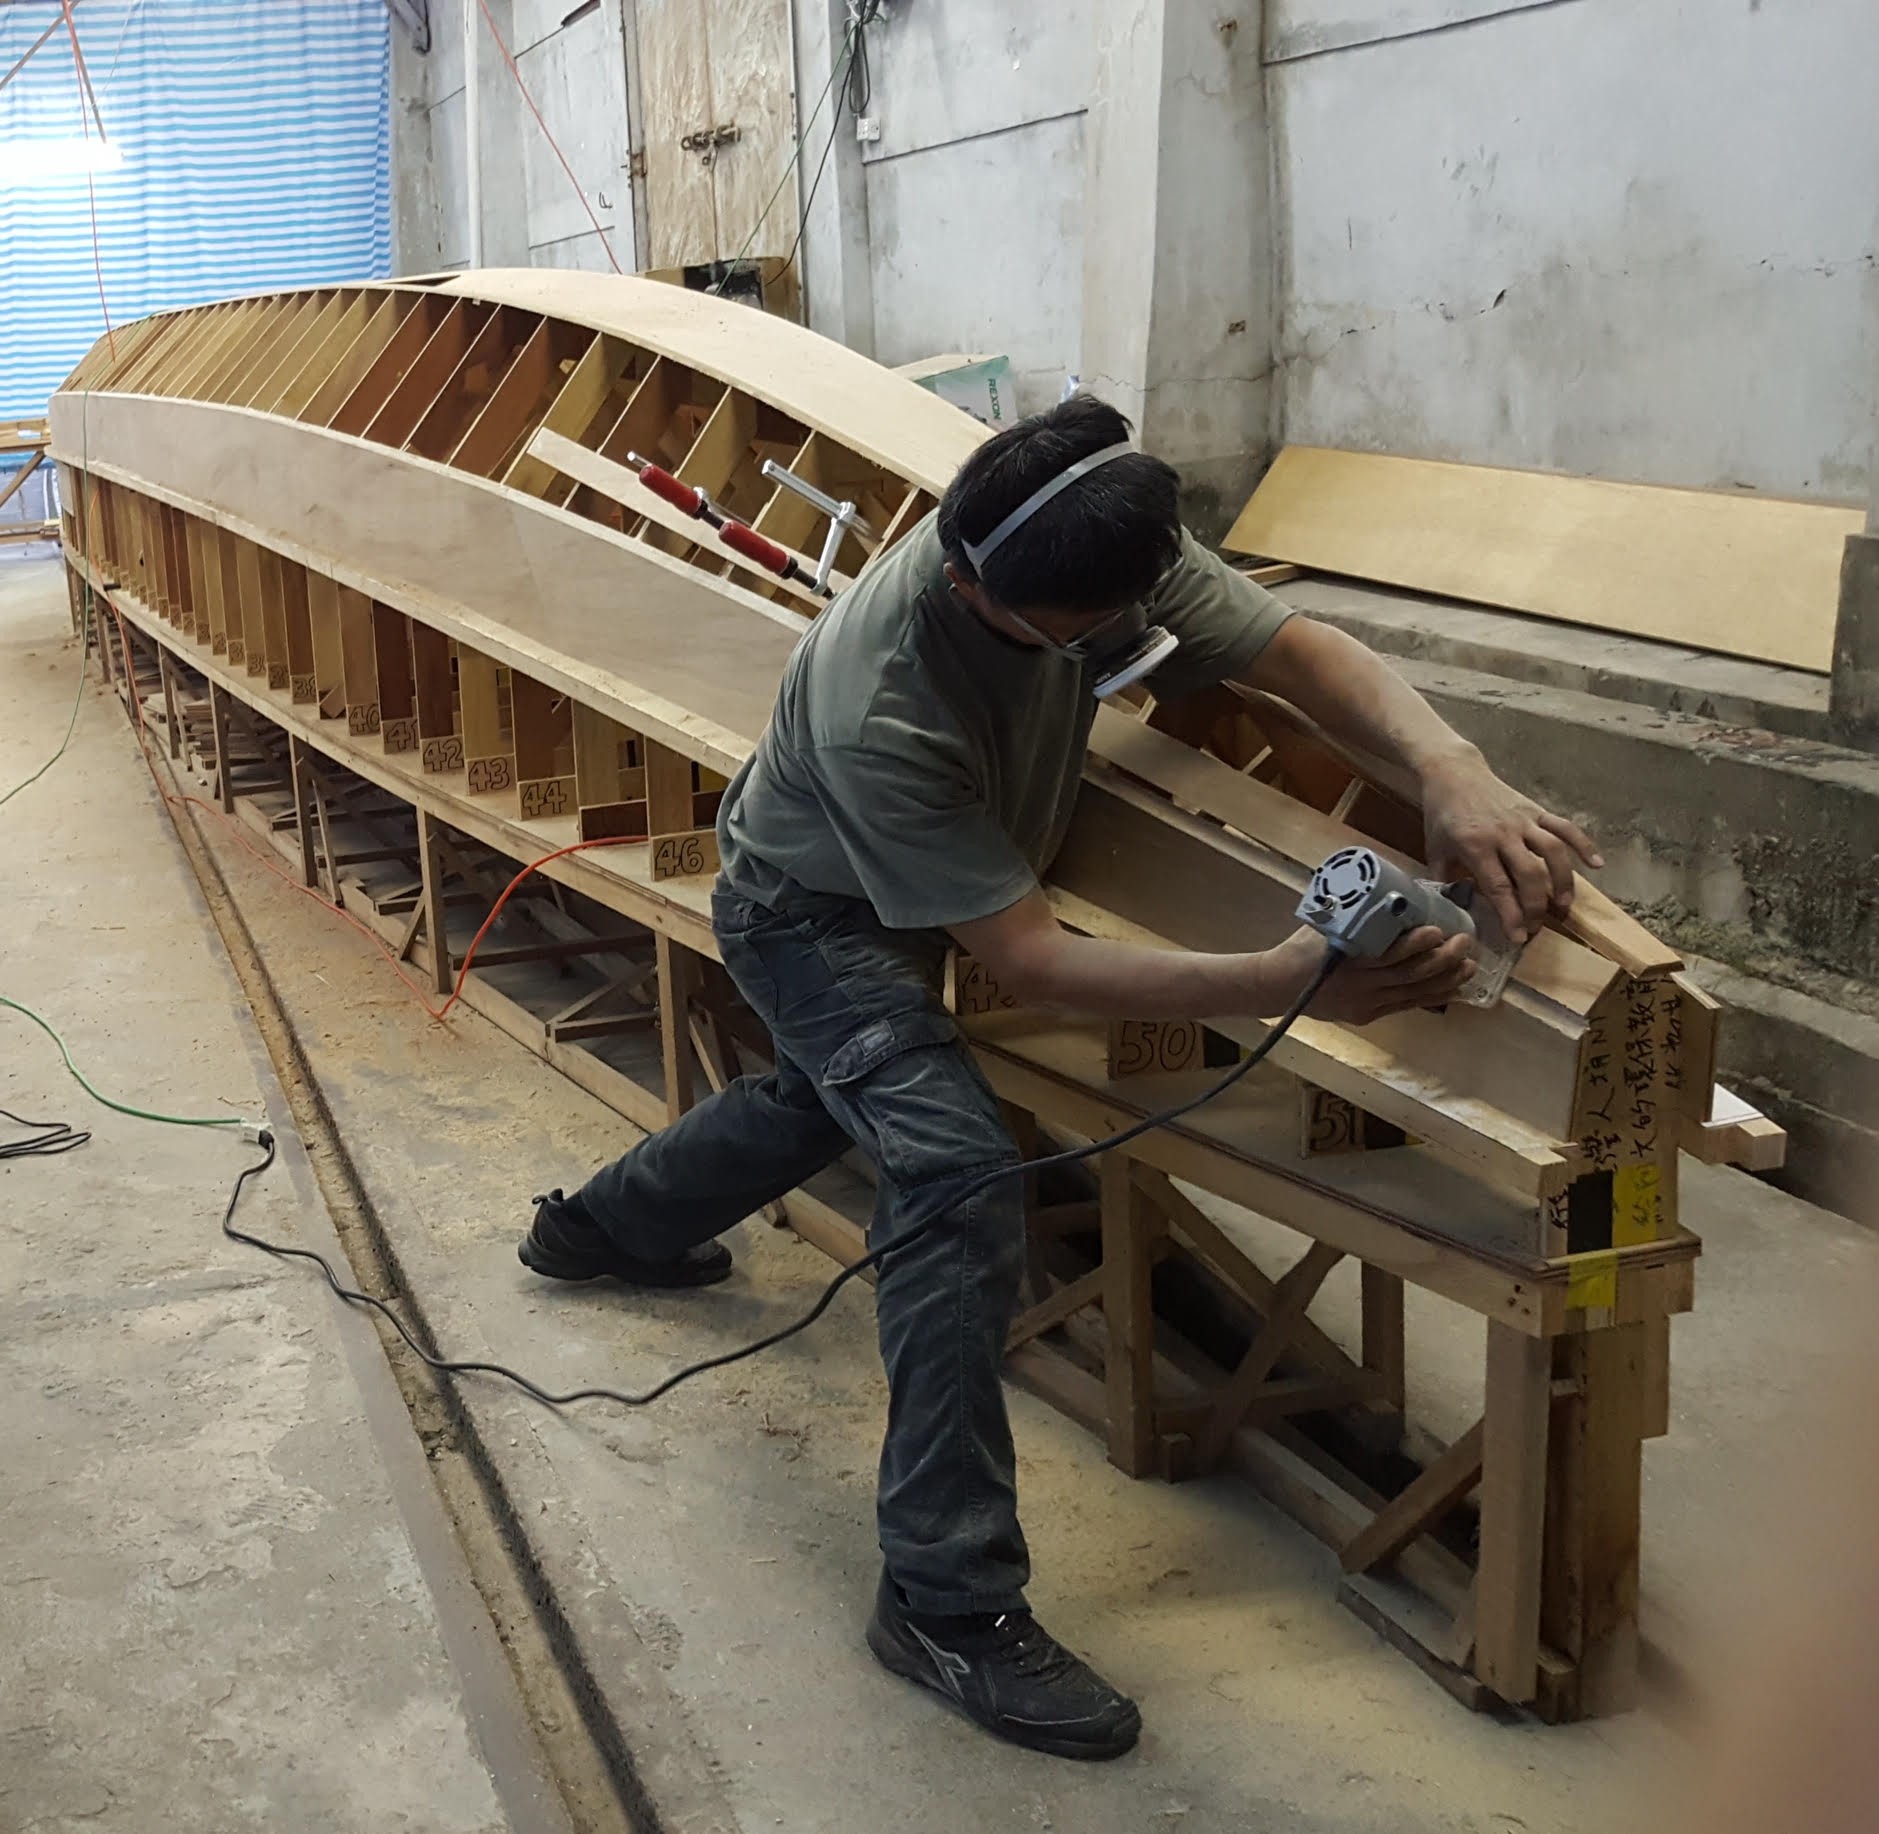 Dragon boat coach Woo Tse-hong spent most of his time last year in Taiwan preparing for the event. He even forked out NT$300,000 (HK$80,600) from his own pocket to build the boat. Photo: Handout